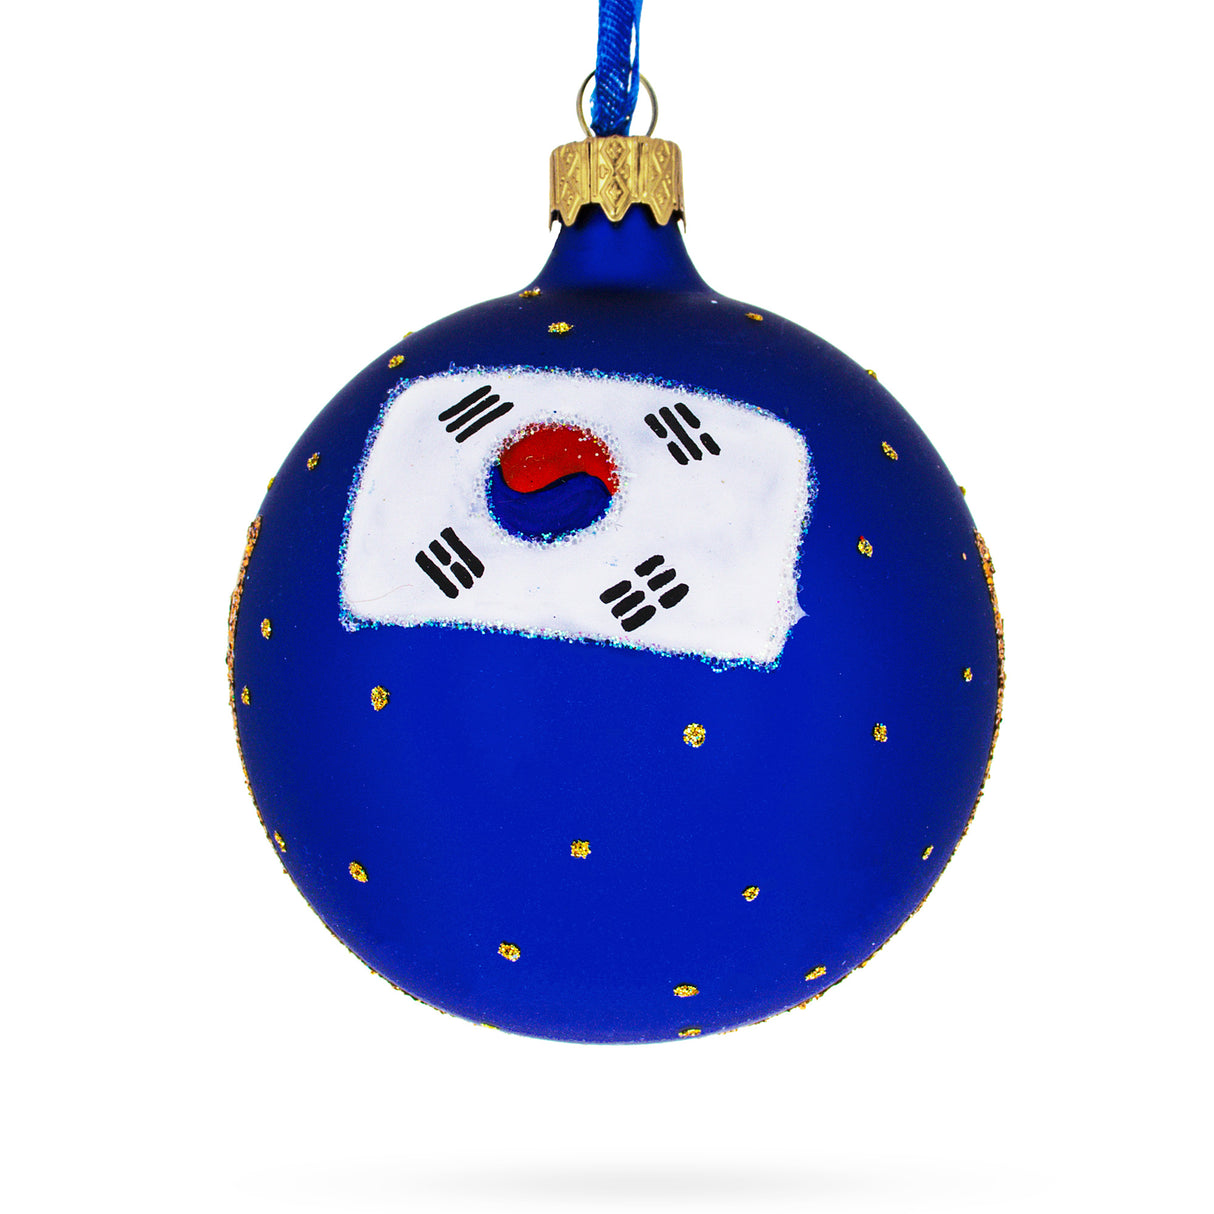 Buy Christmas Ornaments > Travel > Asia > South Korea by BestPysanky Online Gift Ship